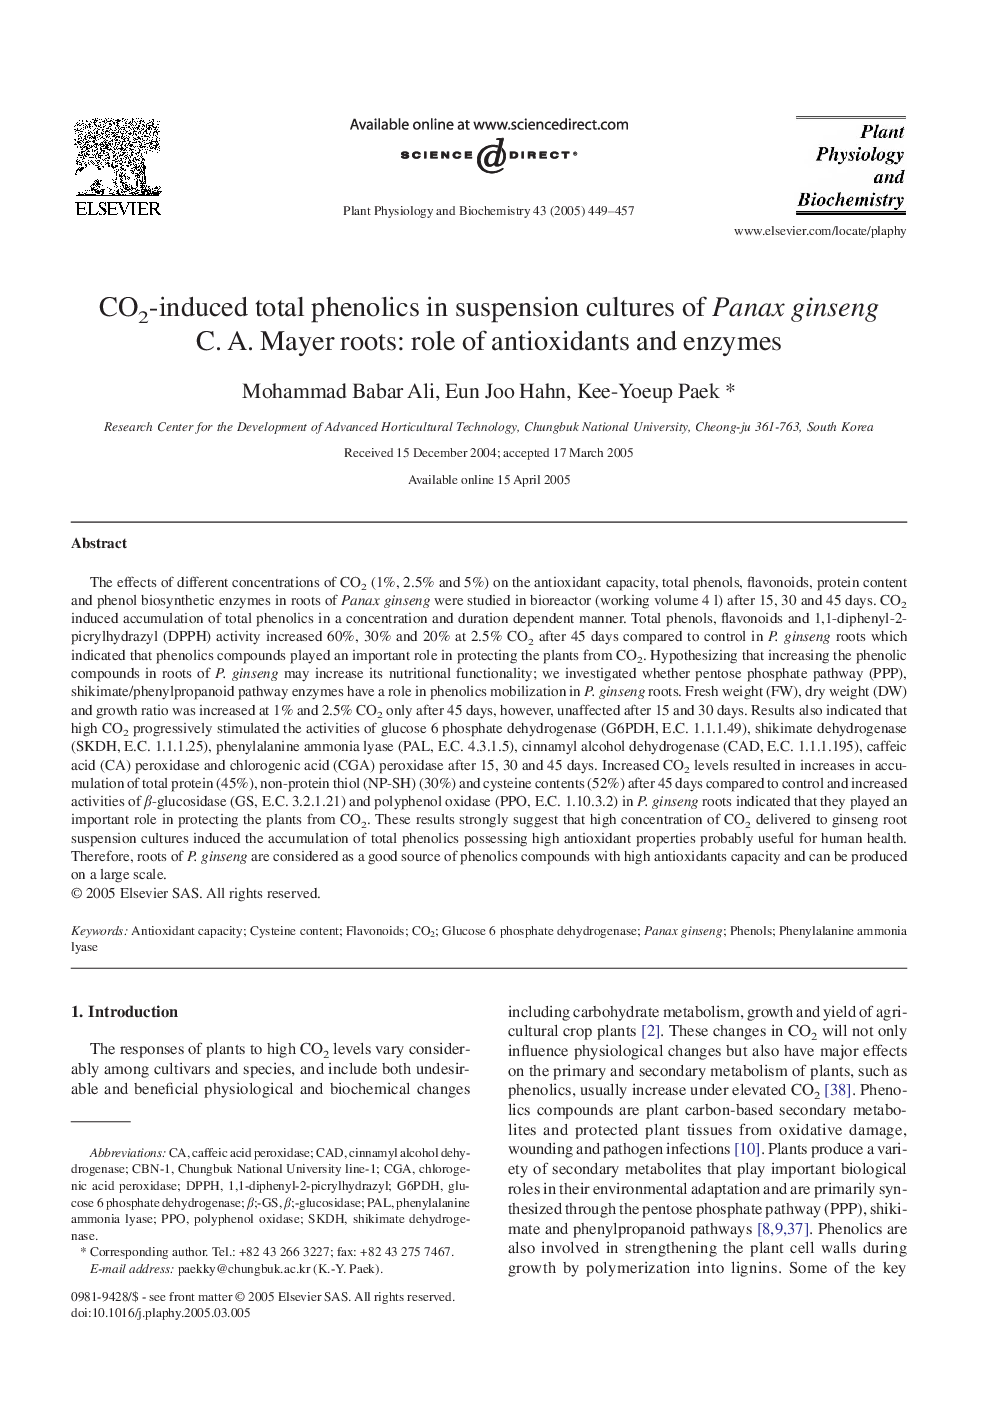 CO2-induced total phenolics in suspension cultures of Panax ginseng C. A. Mayer roots: role of antioxidants and enzymes